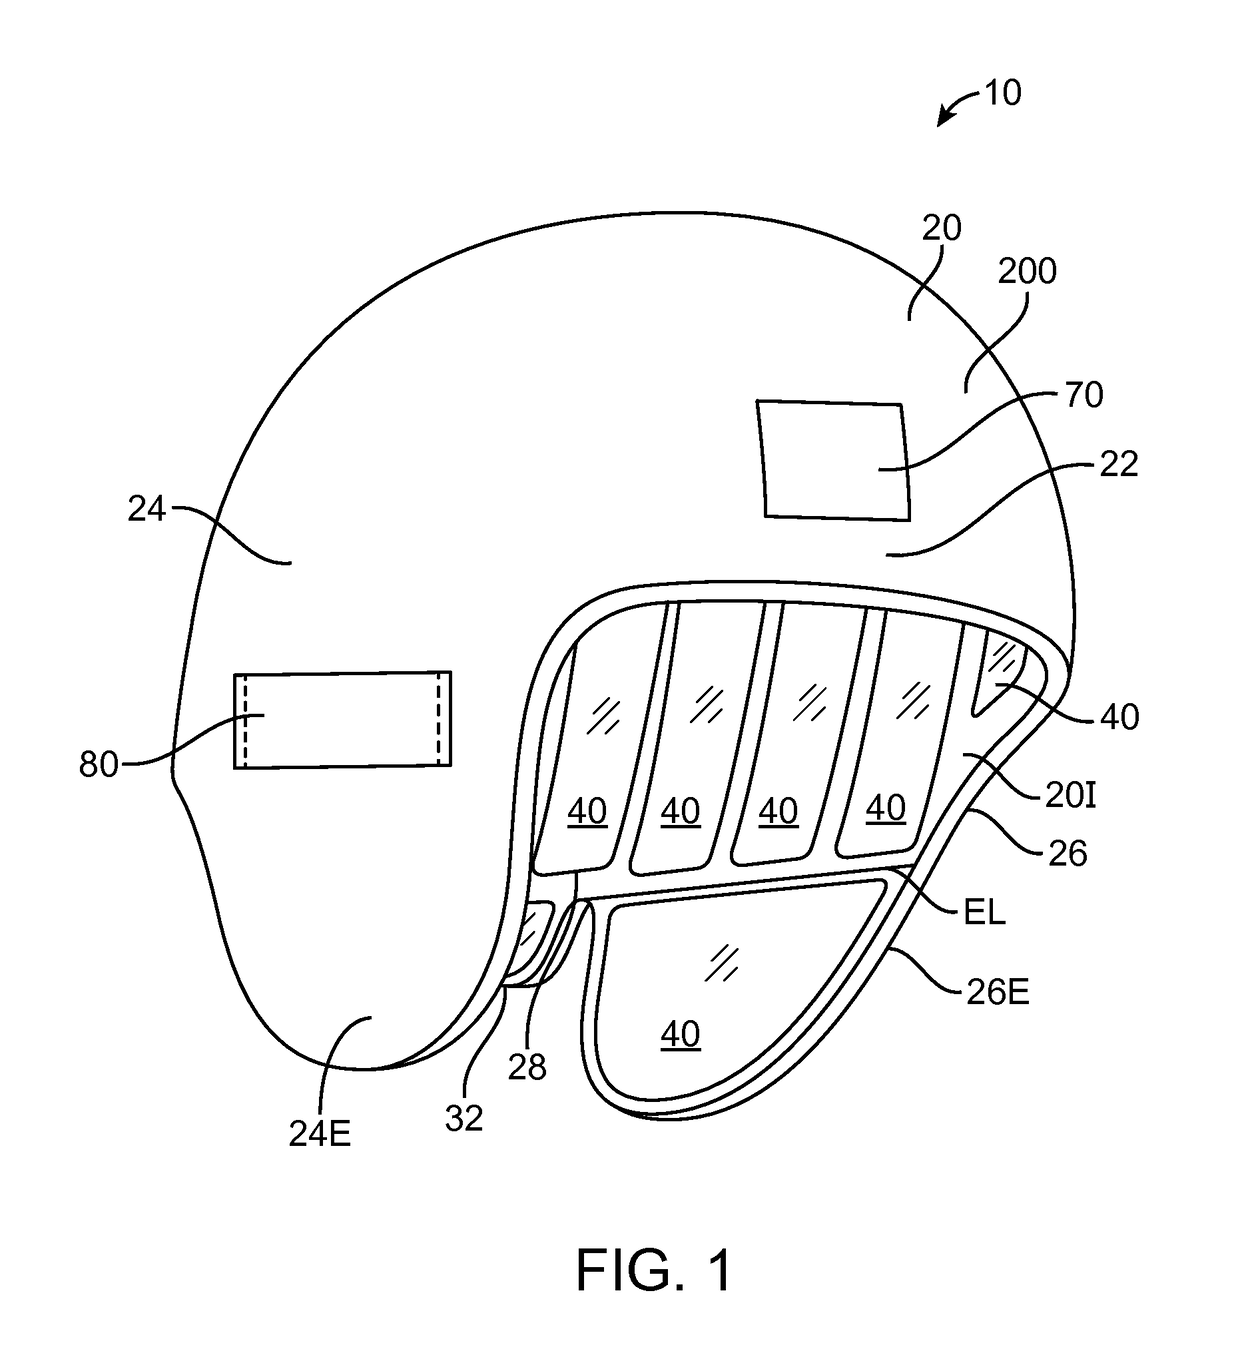 Portable rapid cooling, hypothermia inducing headgear apparatus for tissue preservation